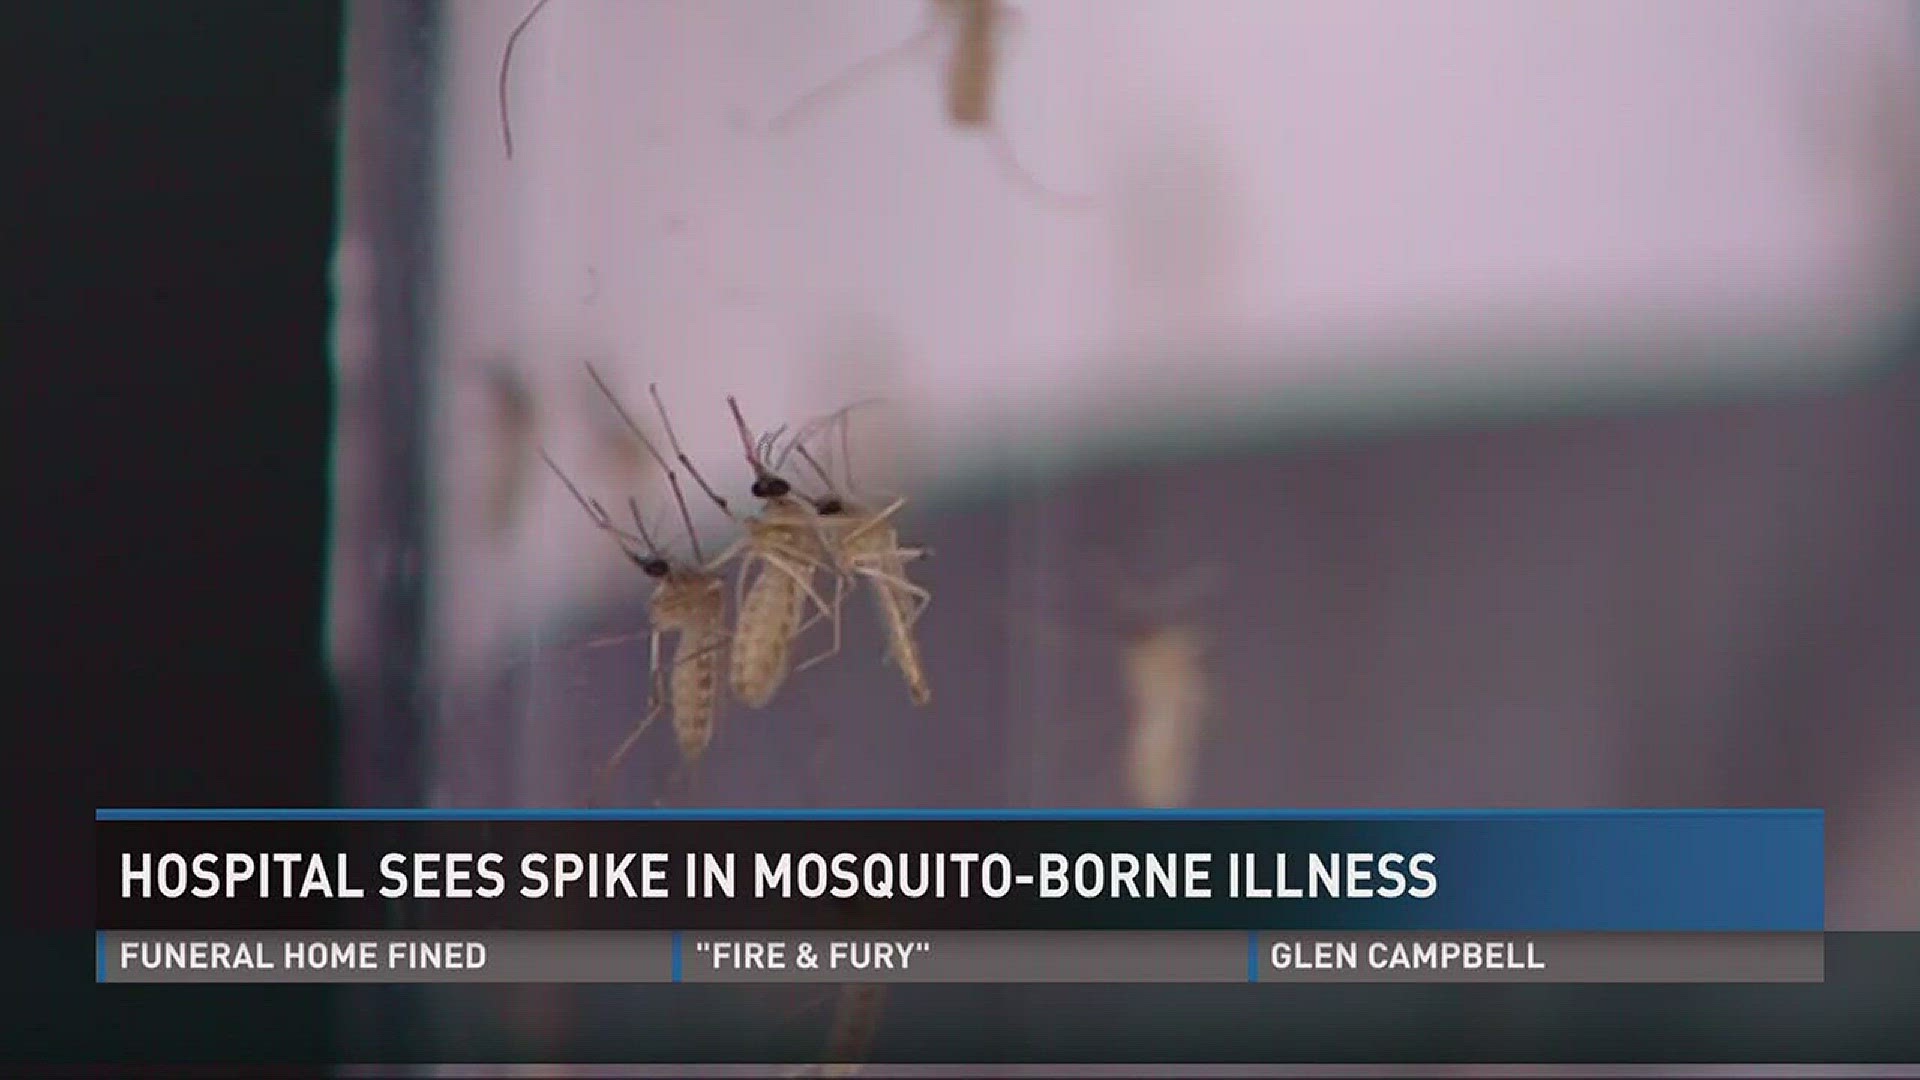 Aug. 8, 2017: East Tennessee Children's Hospital is seeing a spike in a brain-damaging virus carried by mosquitoes.